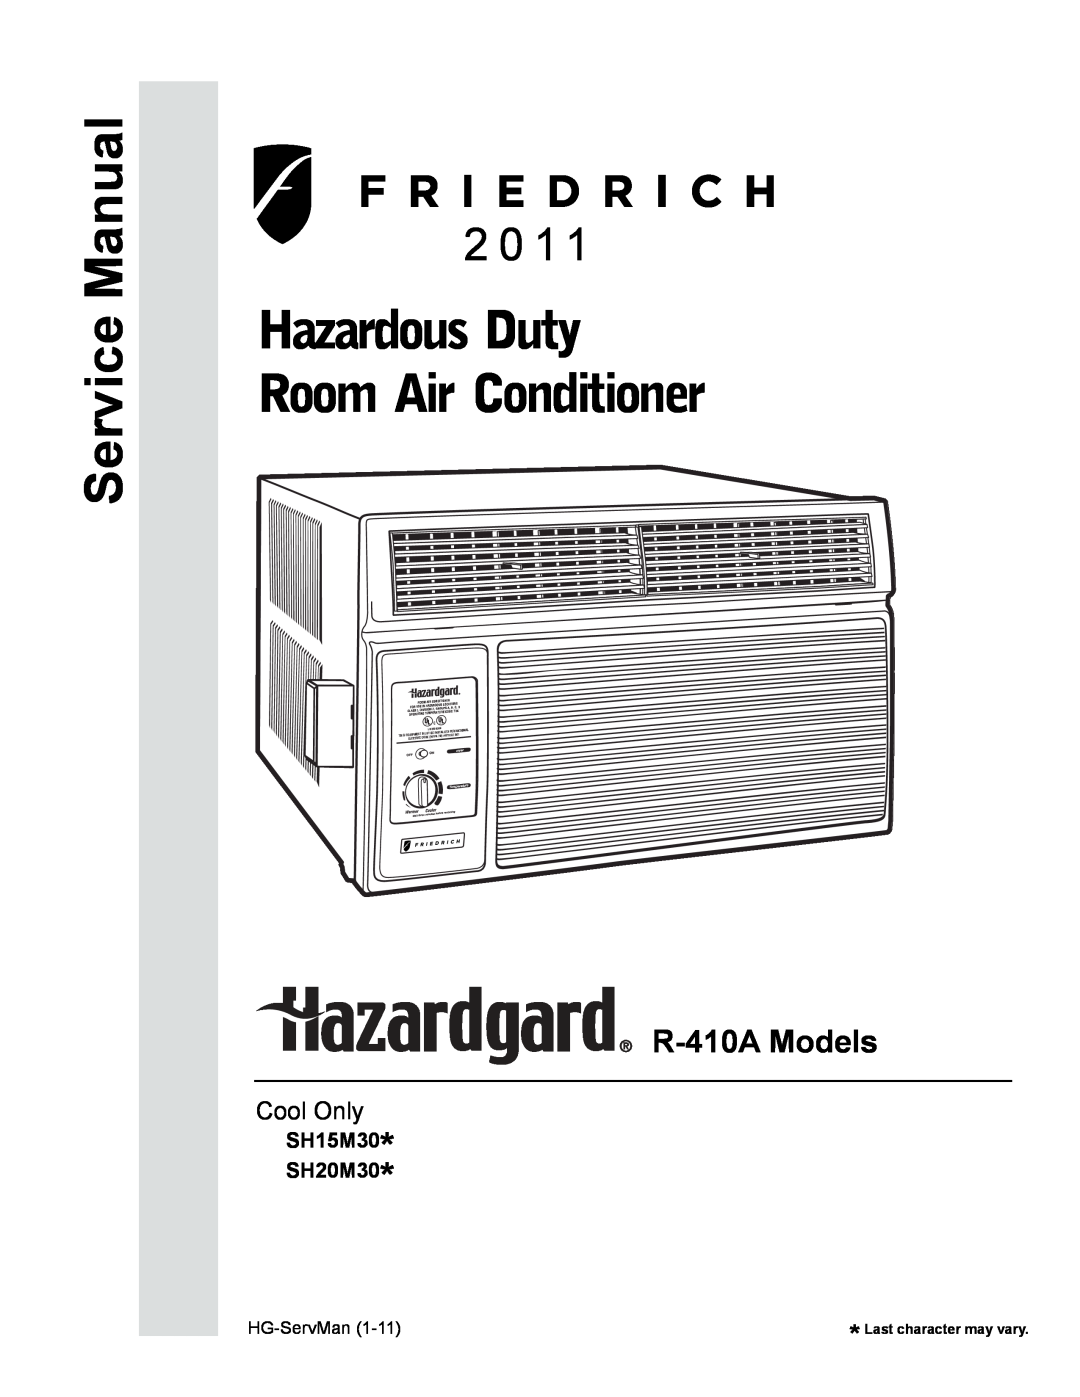 Friedrich service manual R-410AModels, Cool Only, Hazardous Duty Room Air Conditioner, Last character may vary 